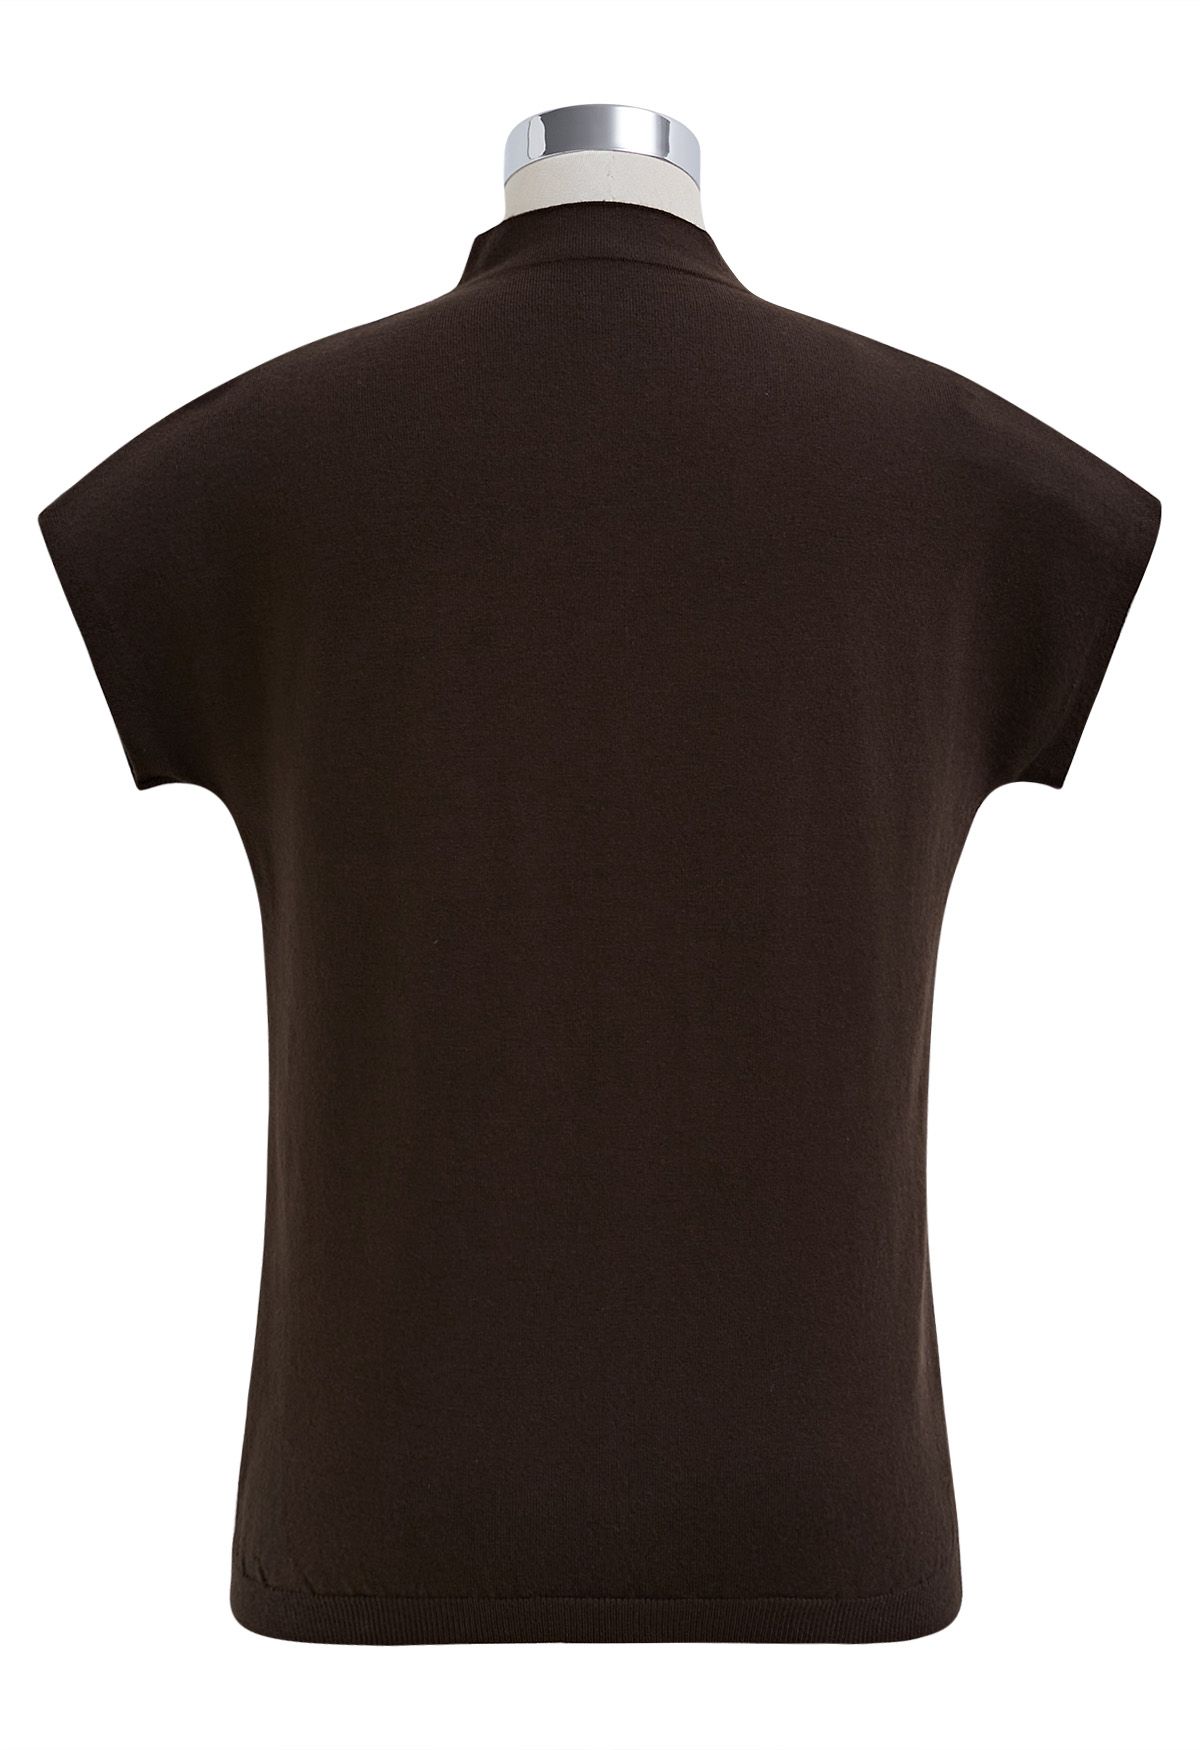 Solid Color Cap Sleeves Knit Top in Brown